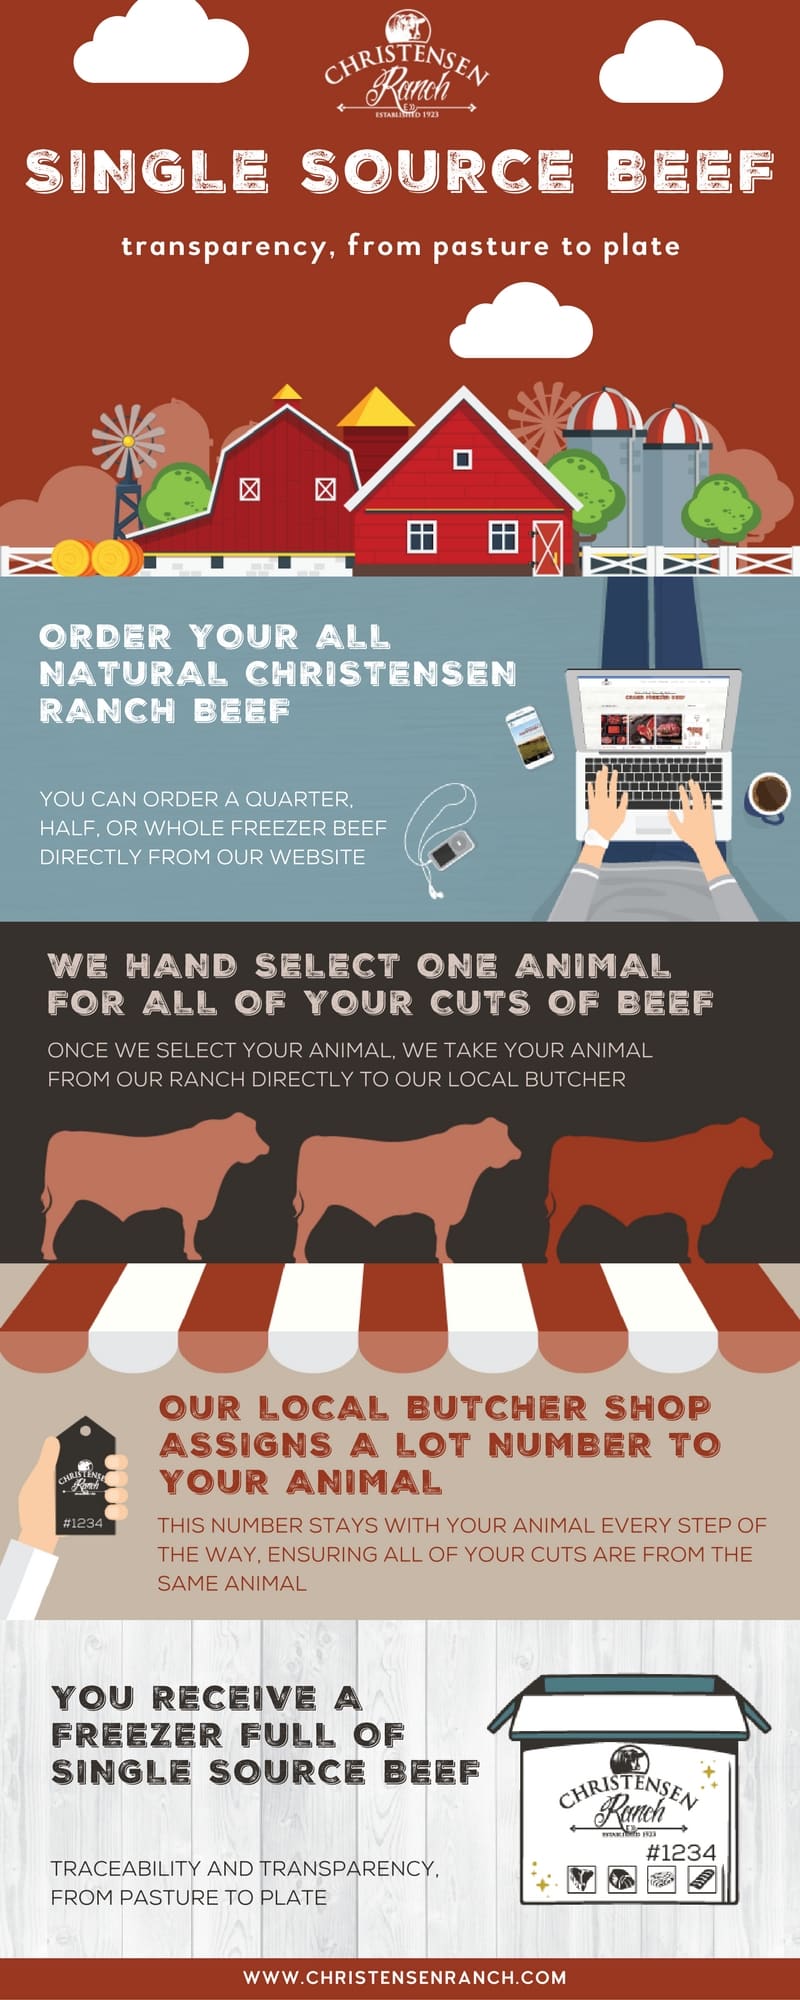 Infographic image showing the path of Christensen Ranch single-source beef from our pasture to your freezer